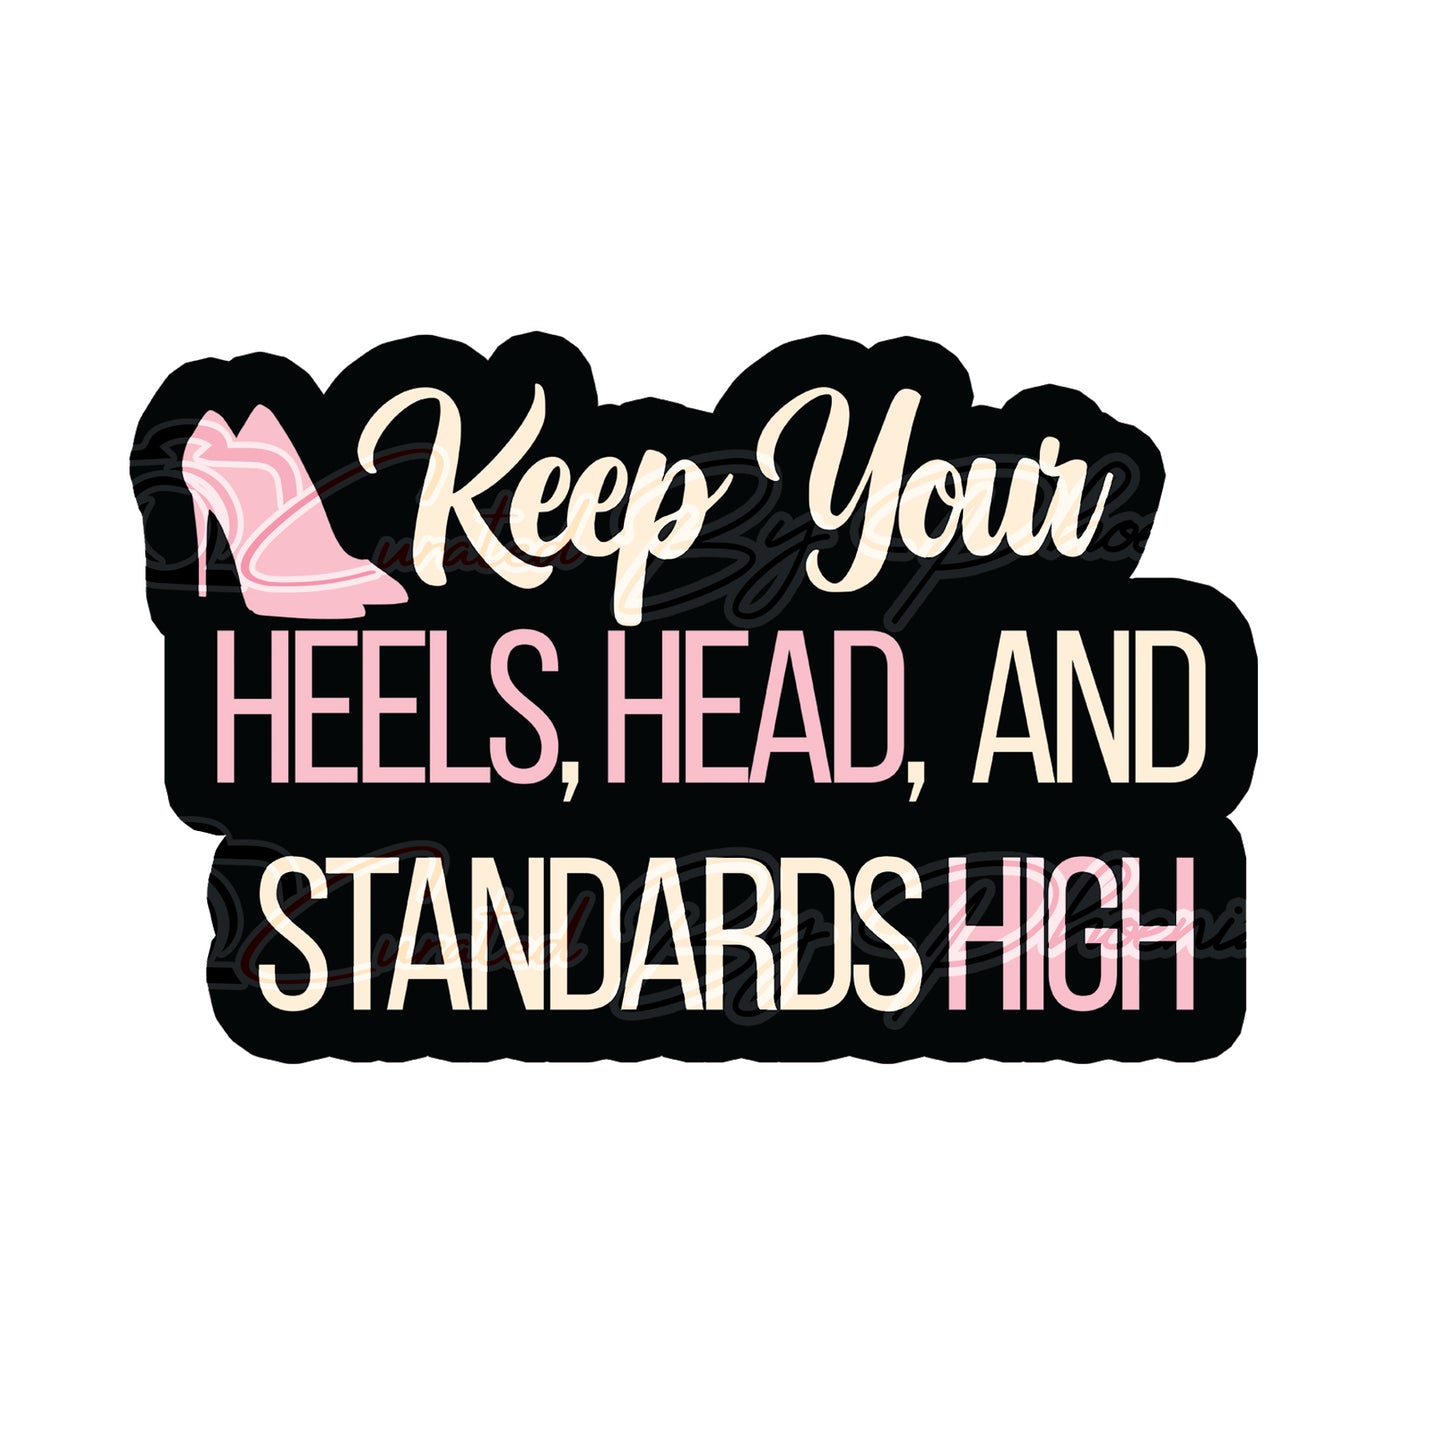 Belle Cabana - “Keep your heels, head and your standards